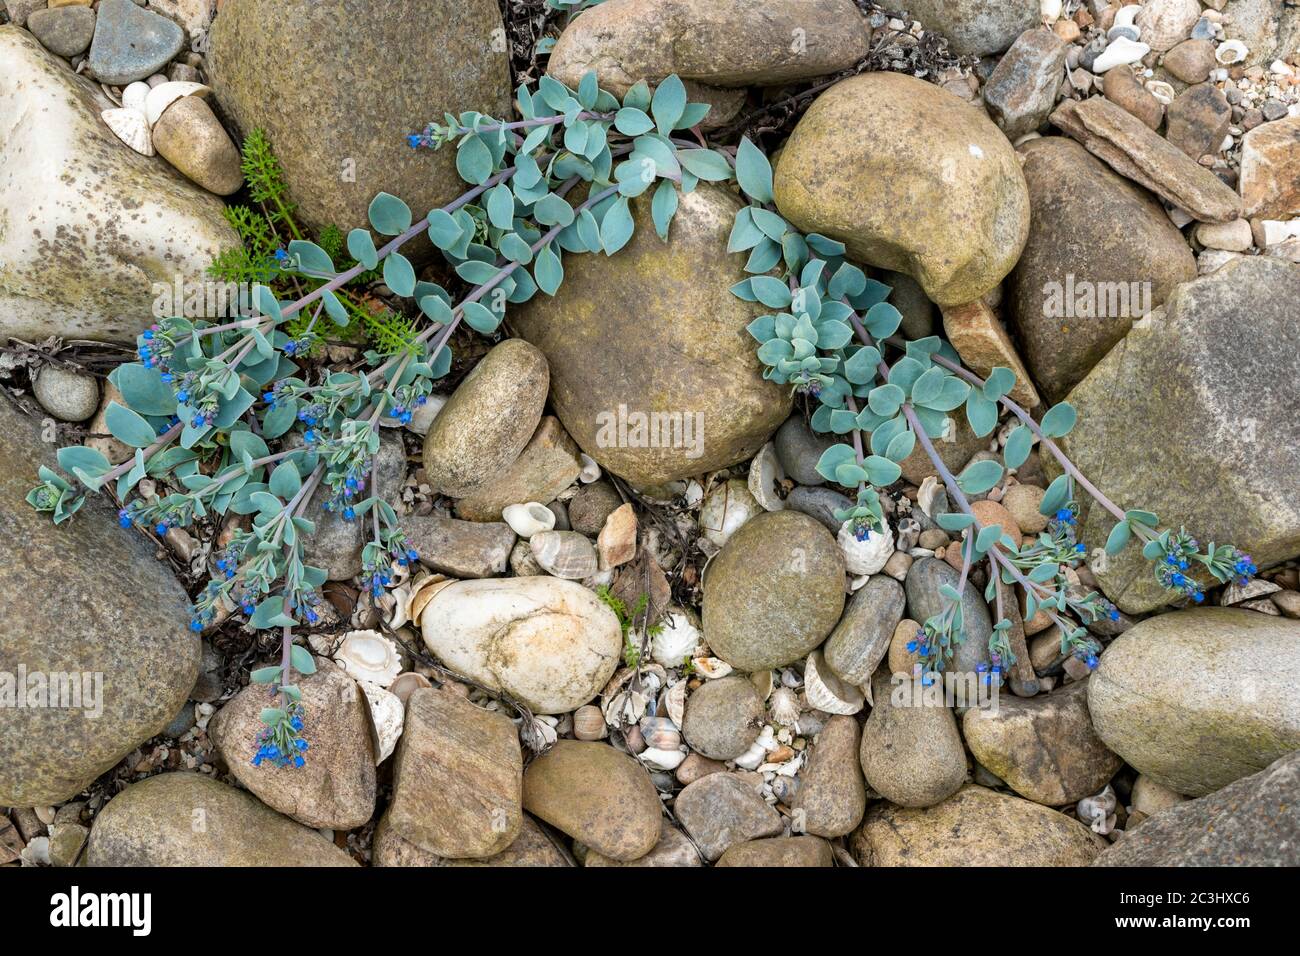 OYSTERPLANT Mertensia maritima A SMALL BLUE GREEN PLANT AND STEMS WITH BRIGHT BLUE FLOWERS ON A SEASHELL AND ROCK COVERED BEACH THE MORAY COAST SCOTLA Stock Photo